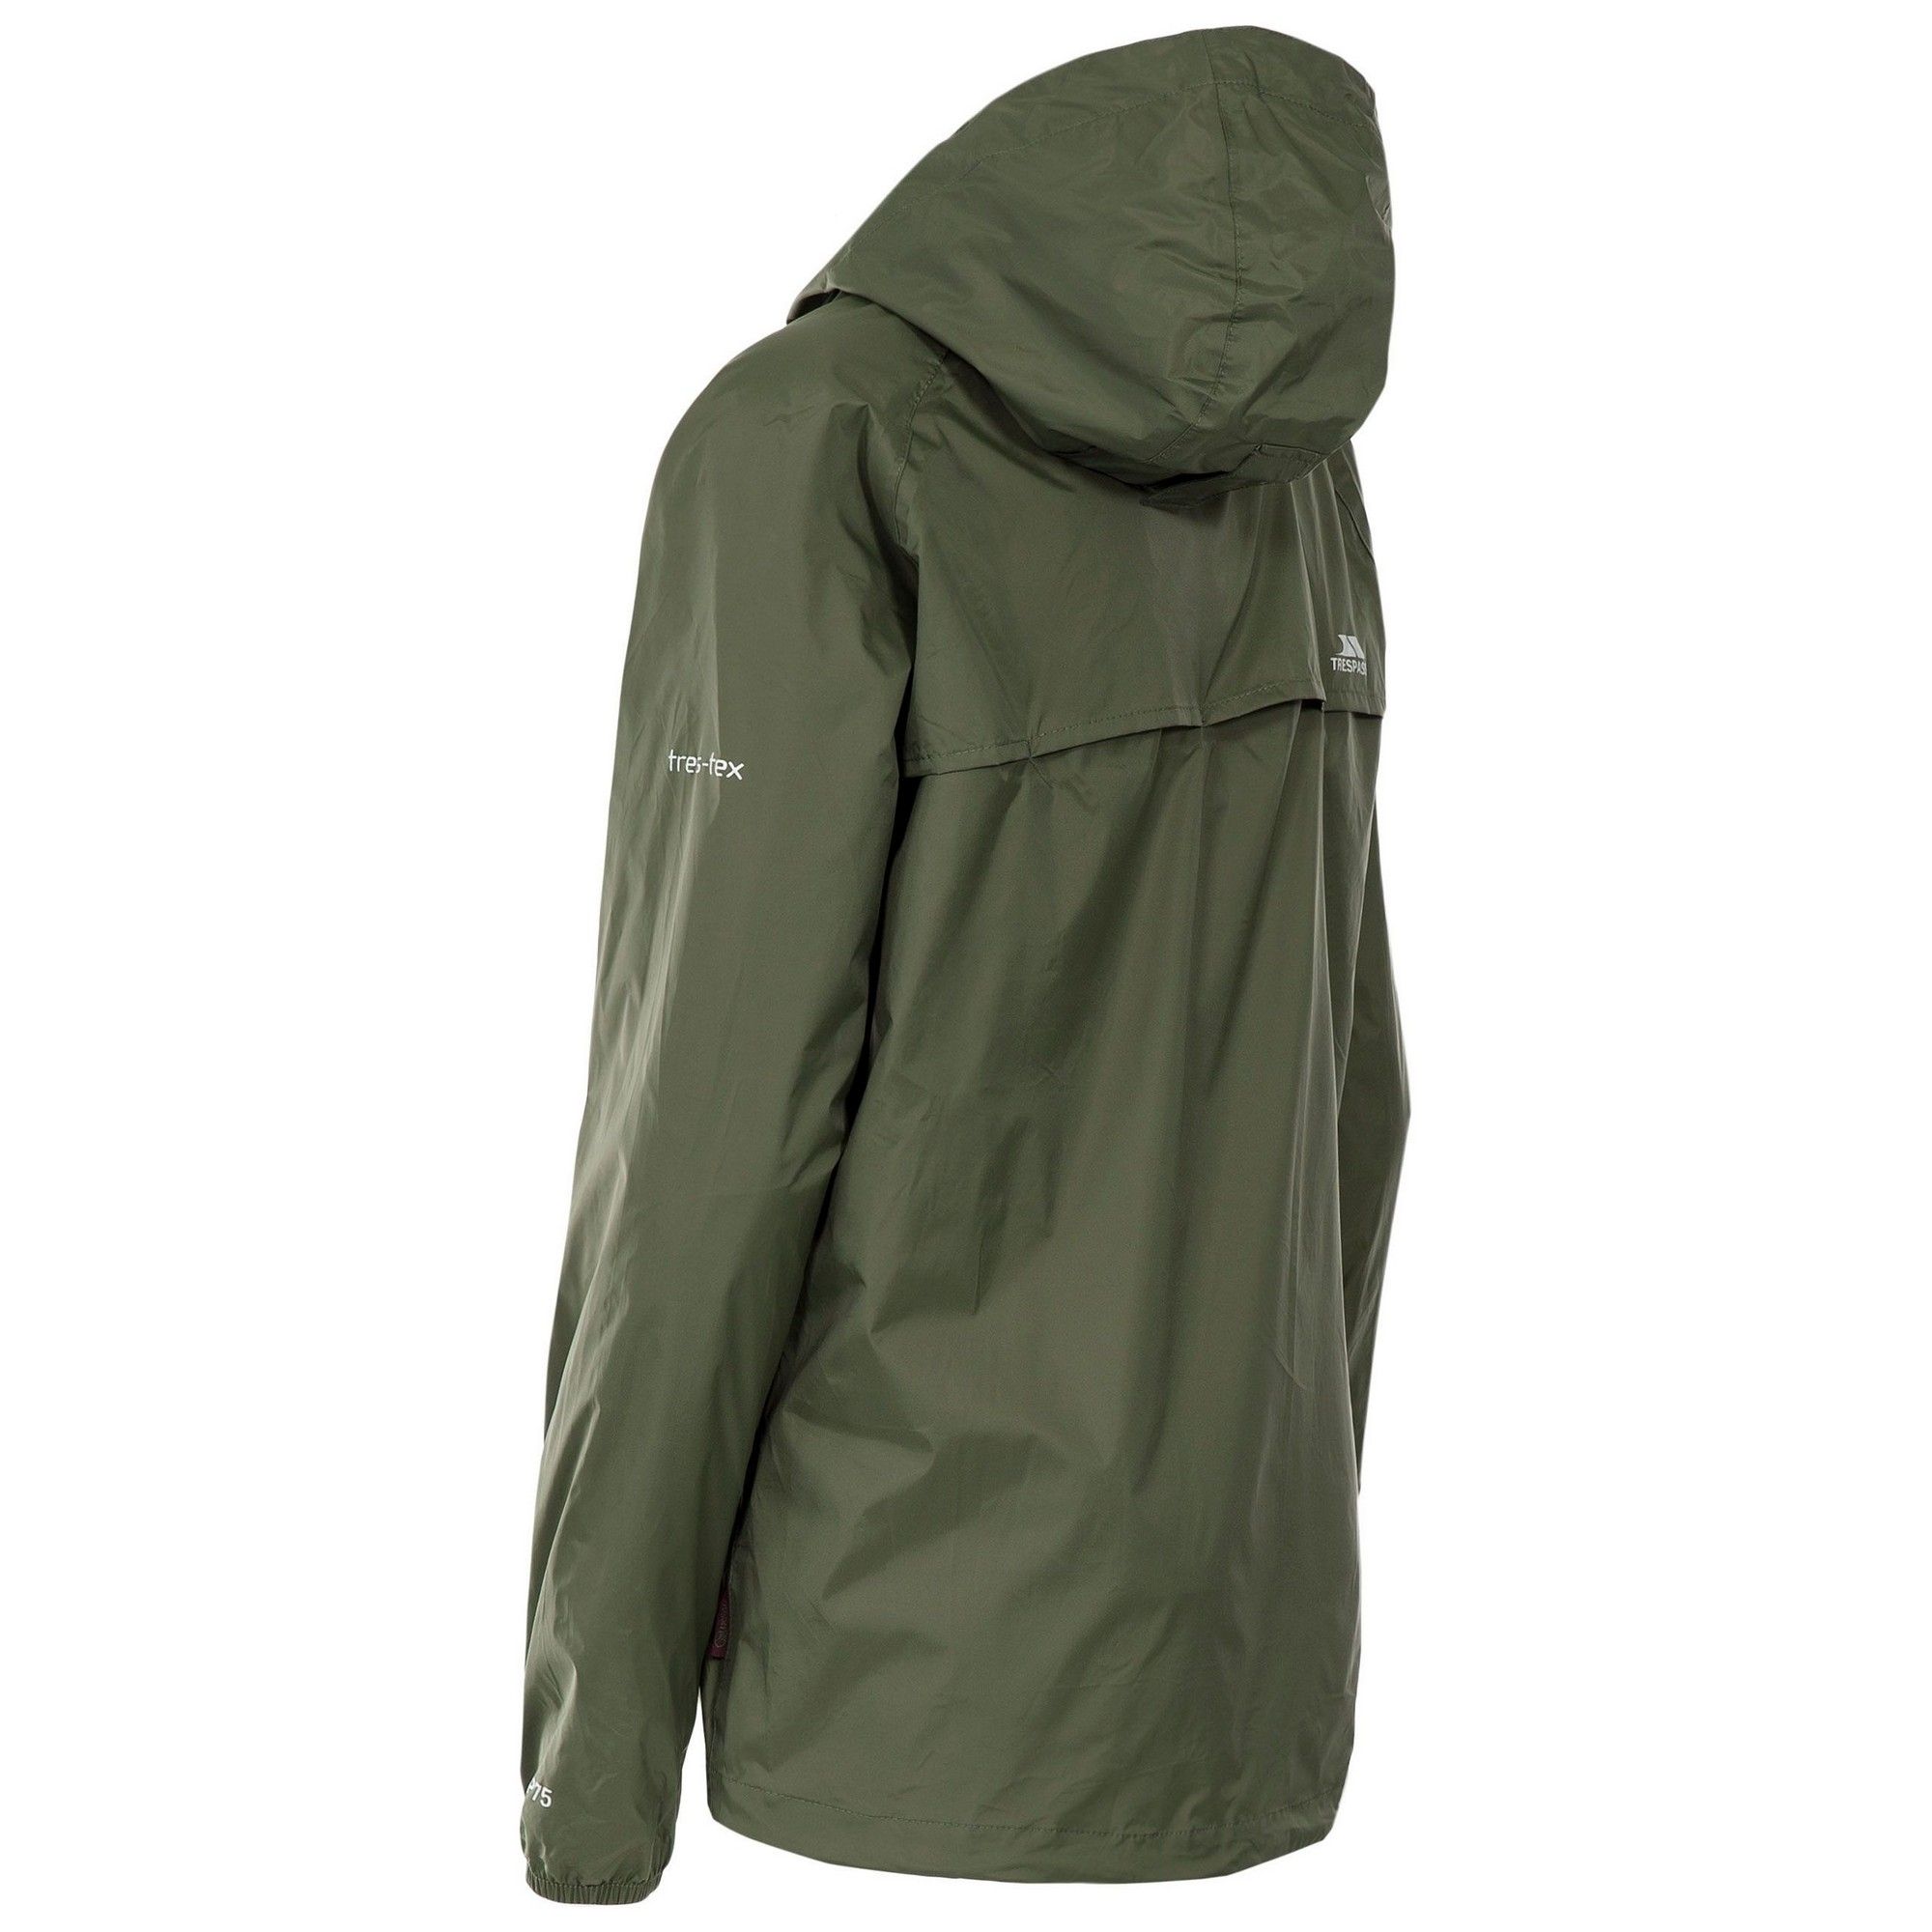 Shell jacket. Adjustable grown on hood. 2 zip pockets. Full elasticated cuff. Full length internal front storm flap. Drawcord at hem. Ventilated back yoke. Contrast low profile zips. Jacket packs into pouch. Waterproof 5000mm, breathable 5000mvp, windproof, taped seams. Shell: 100% Polyamide PU coating, Mesh: 100% Polyester. Trespass Womens Chest Sizing (approx): XS/8 - 32in/81cm, S/10 - 34in/86cm, M/12 - 36in/91.4cm, L/14 - 38in/96.5cm, XL/16 - 40in/101.5cm, XXL/18 - 42in/106.5cm.